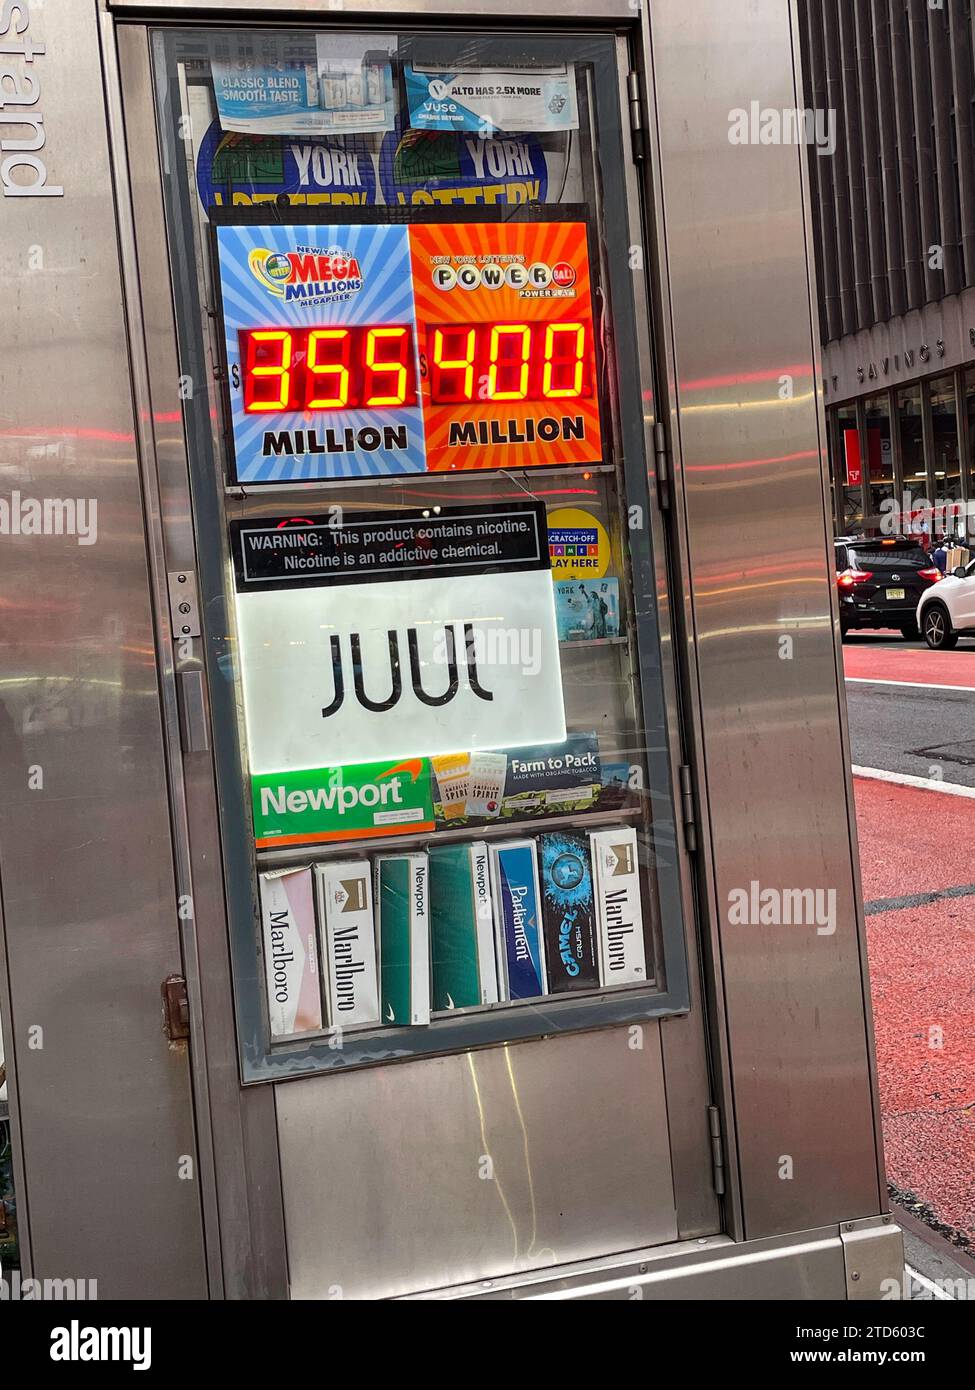 Juul electronic cigarette advertising on the side of the sidewalk convenience stand, 2023, New York City, United States Stock Photo